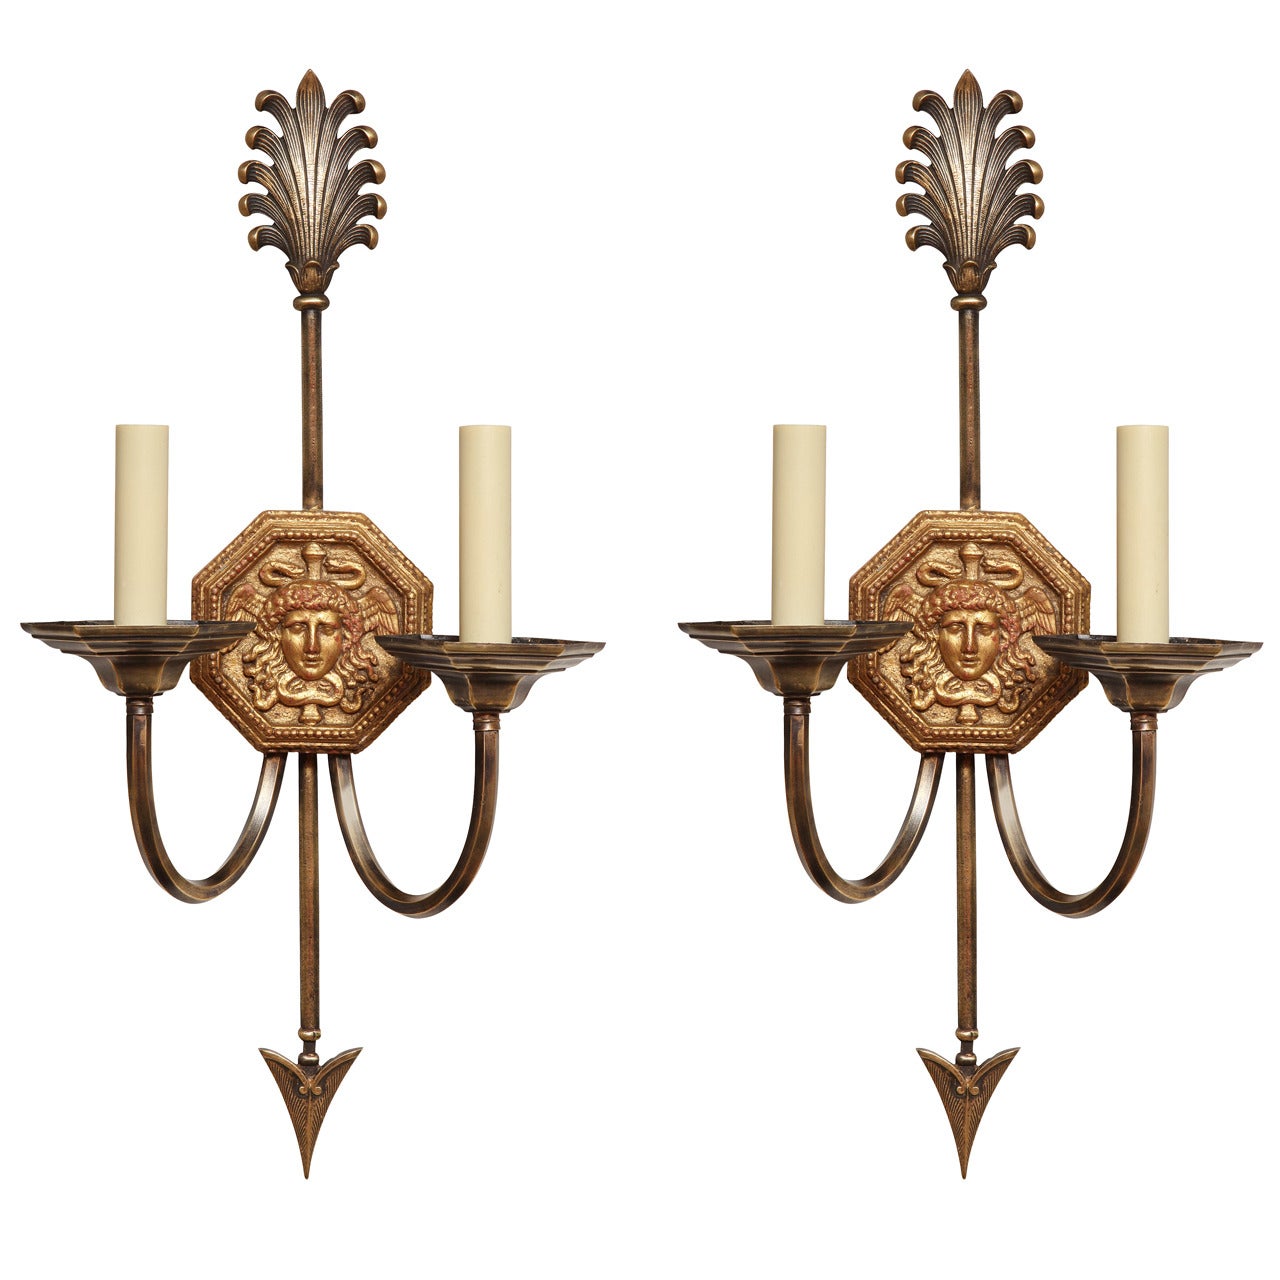 A Pair of Caldwell Two-Light Empire Style Sconces